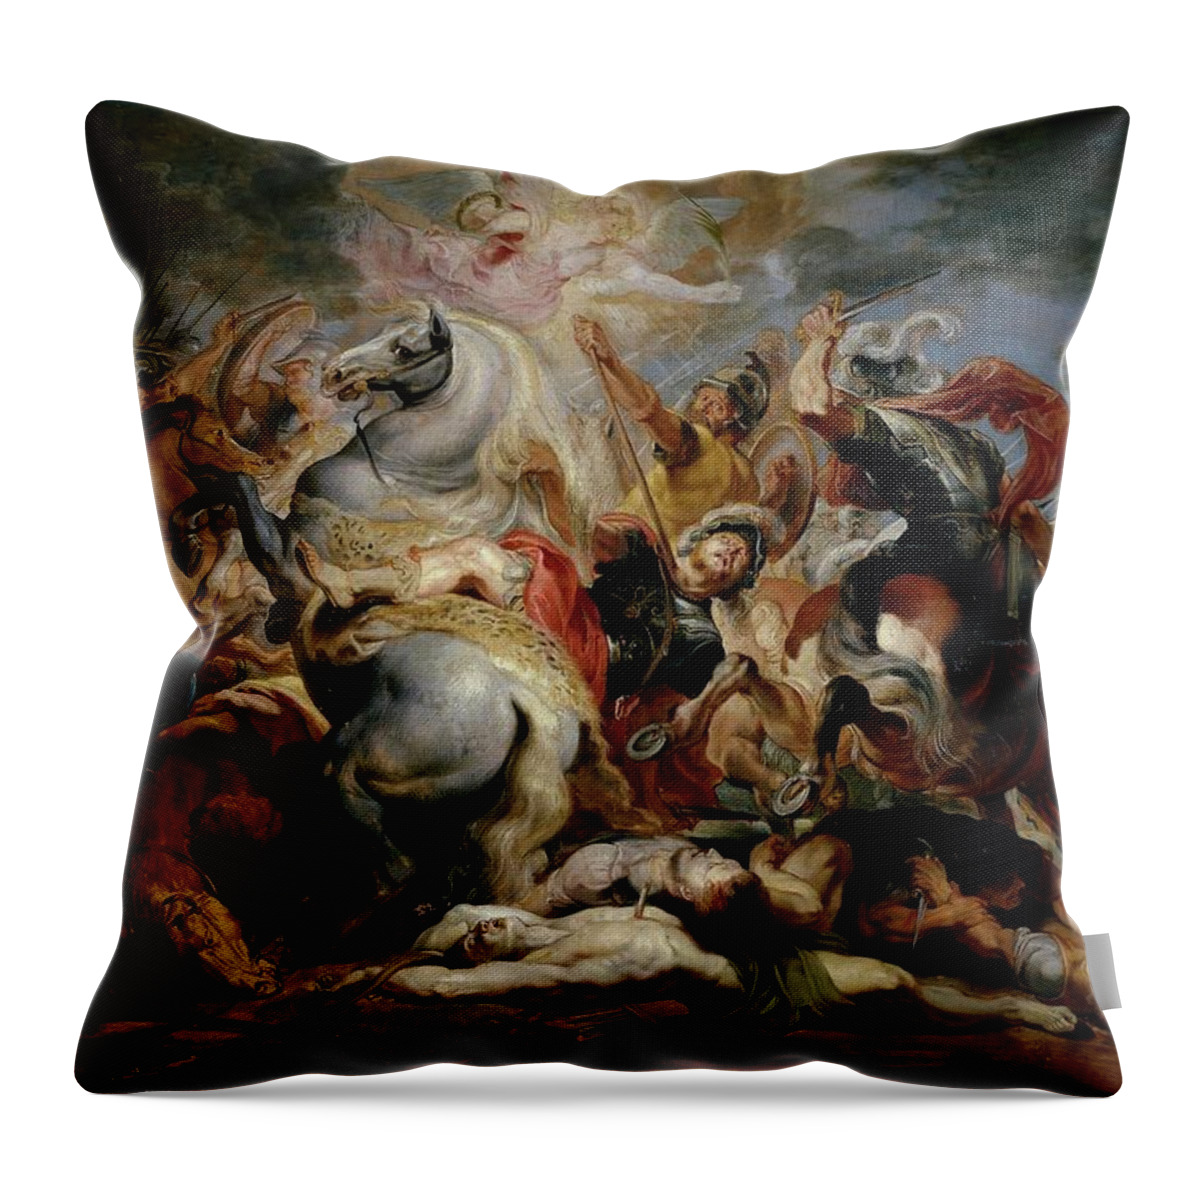 Peter Paul Rubens Throw Pillow featuring the painting Pedro Pablo Rubens / 'The Death of Consul Decio', 1616-1617, Flemish School, Oil on panel. by Peter Paul Rubens -1577-1640-